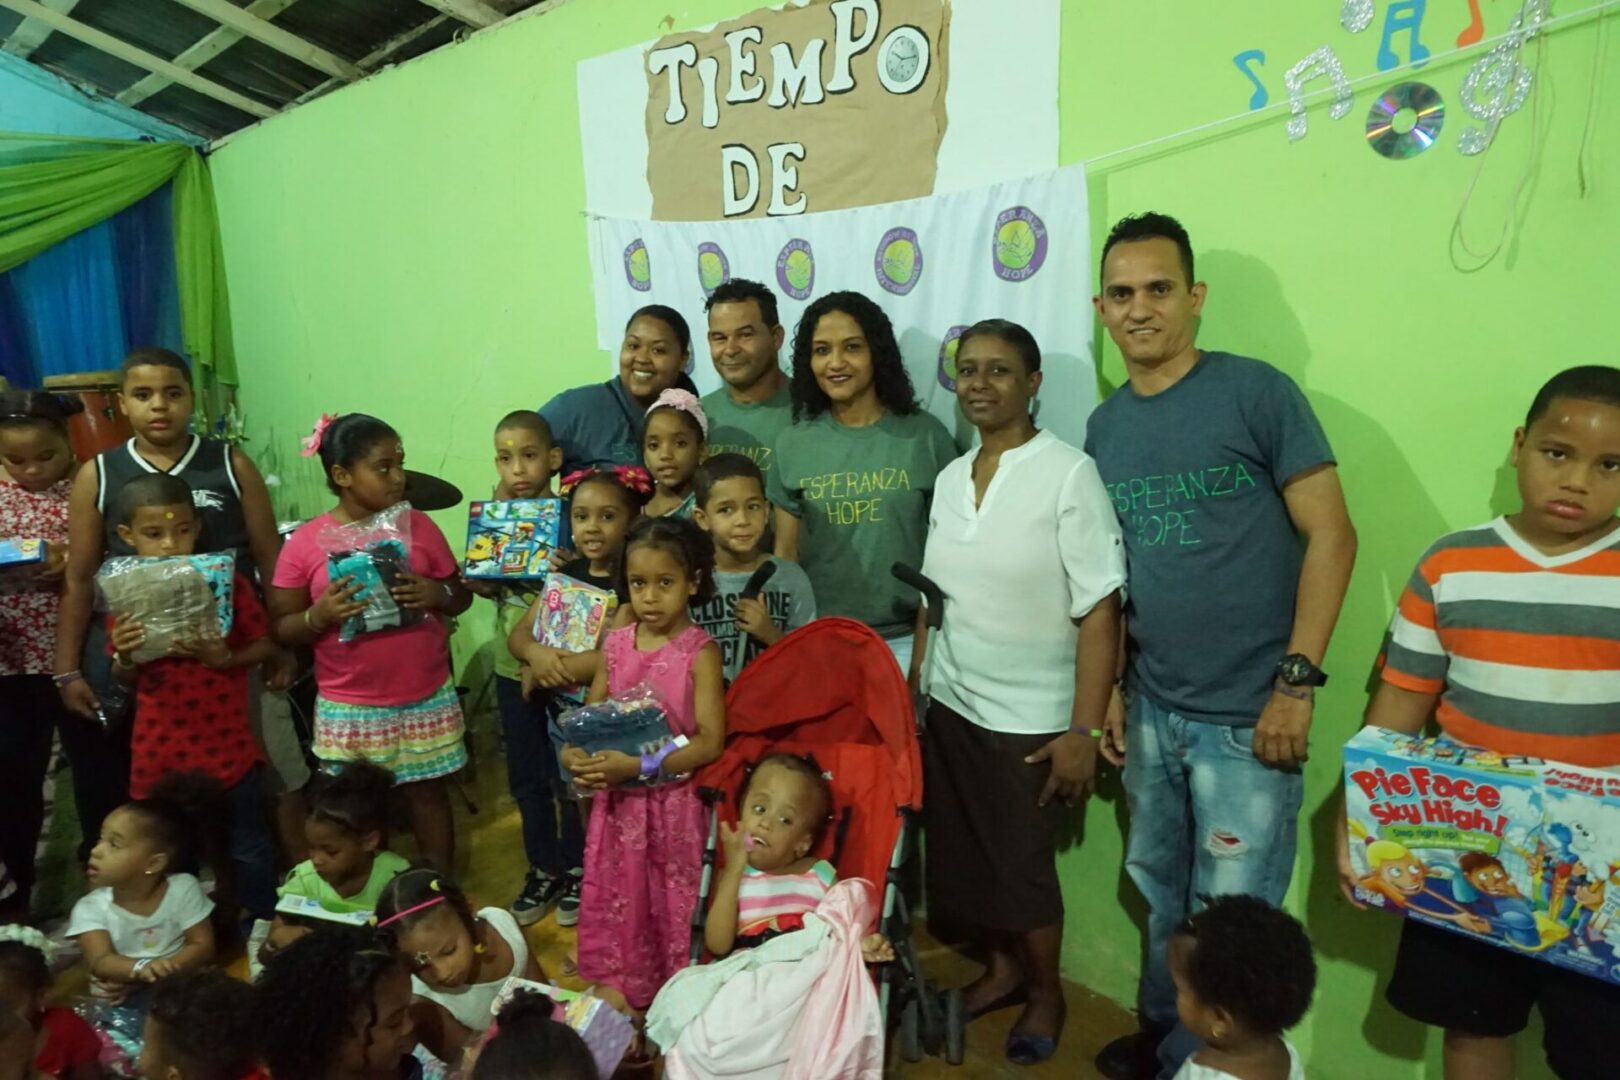 The staff and some of the adults from the Iglesia; the children around them